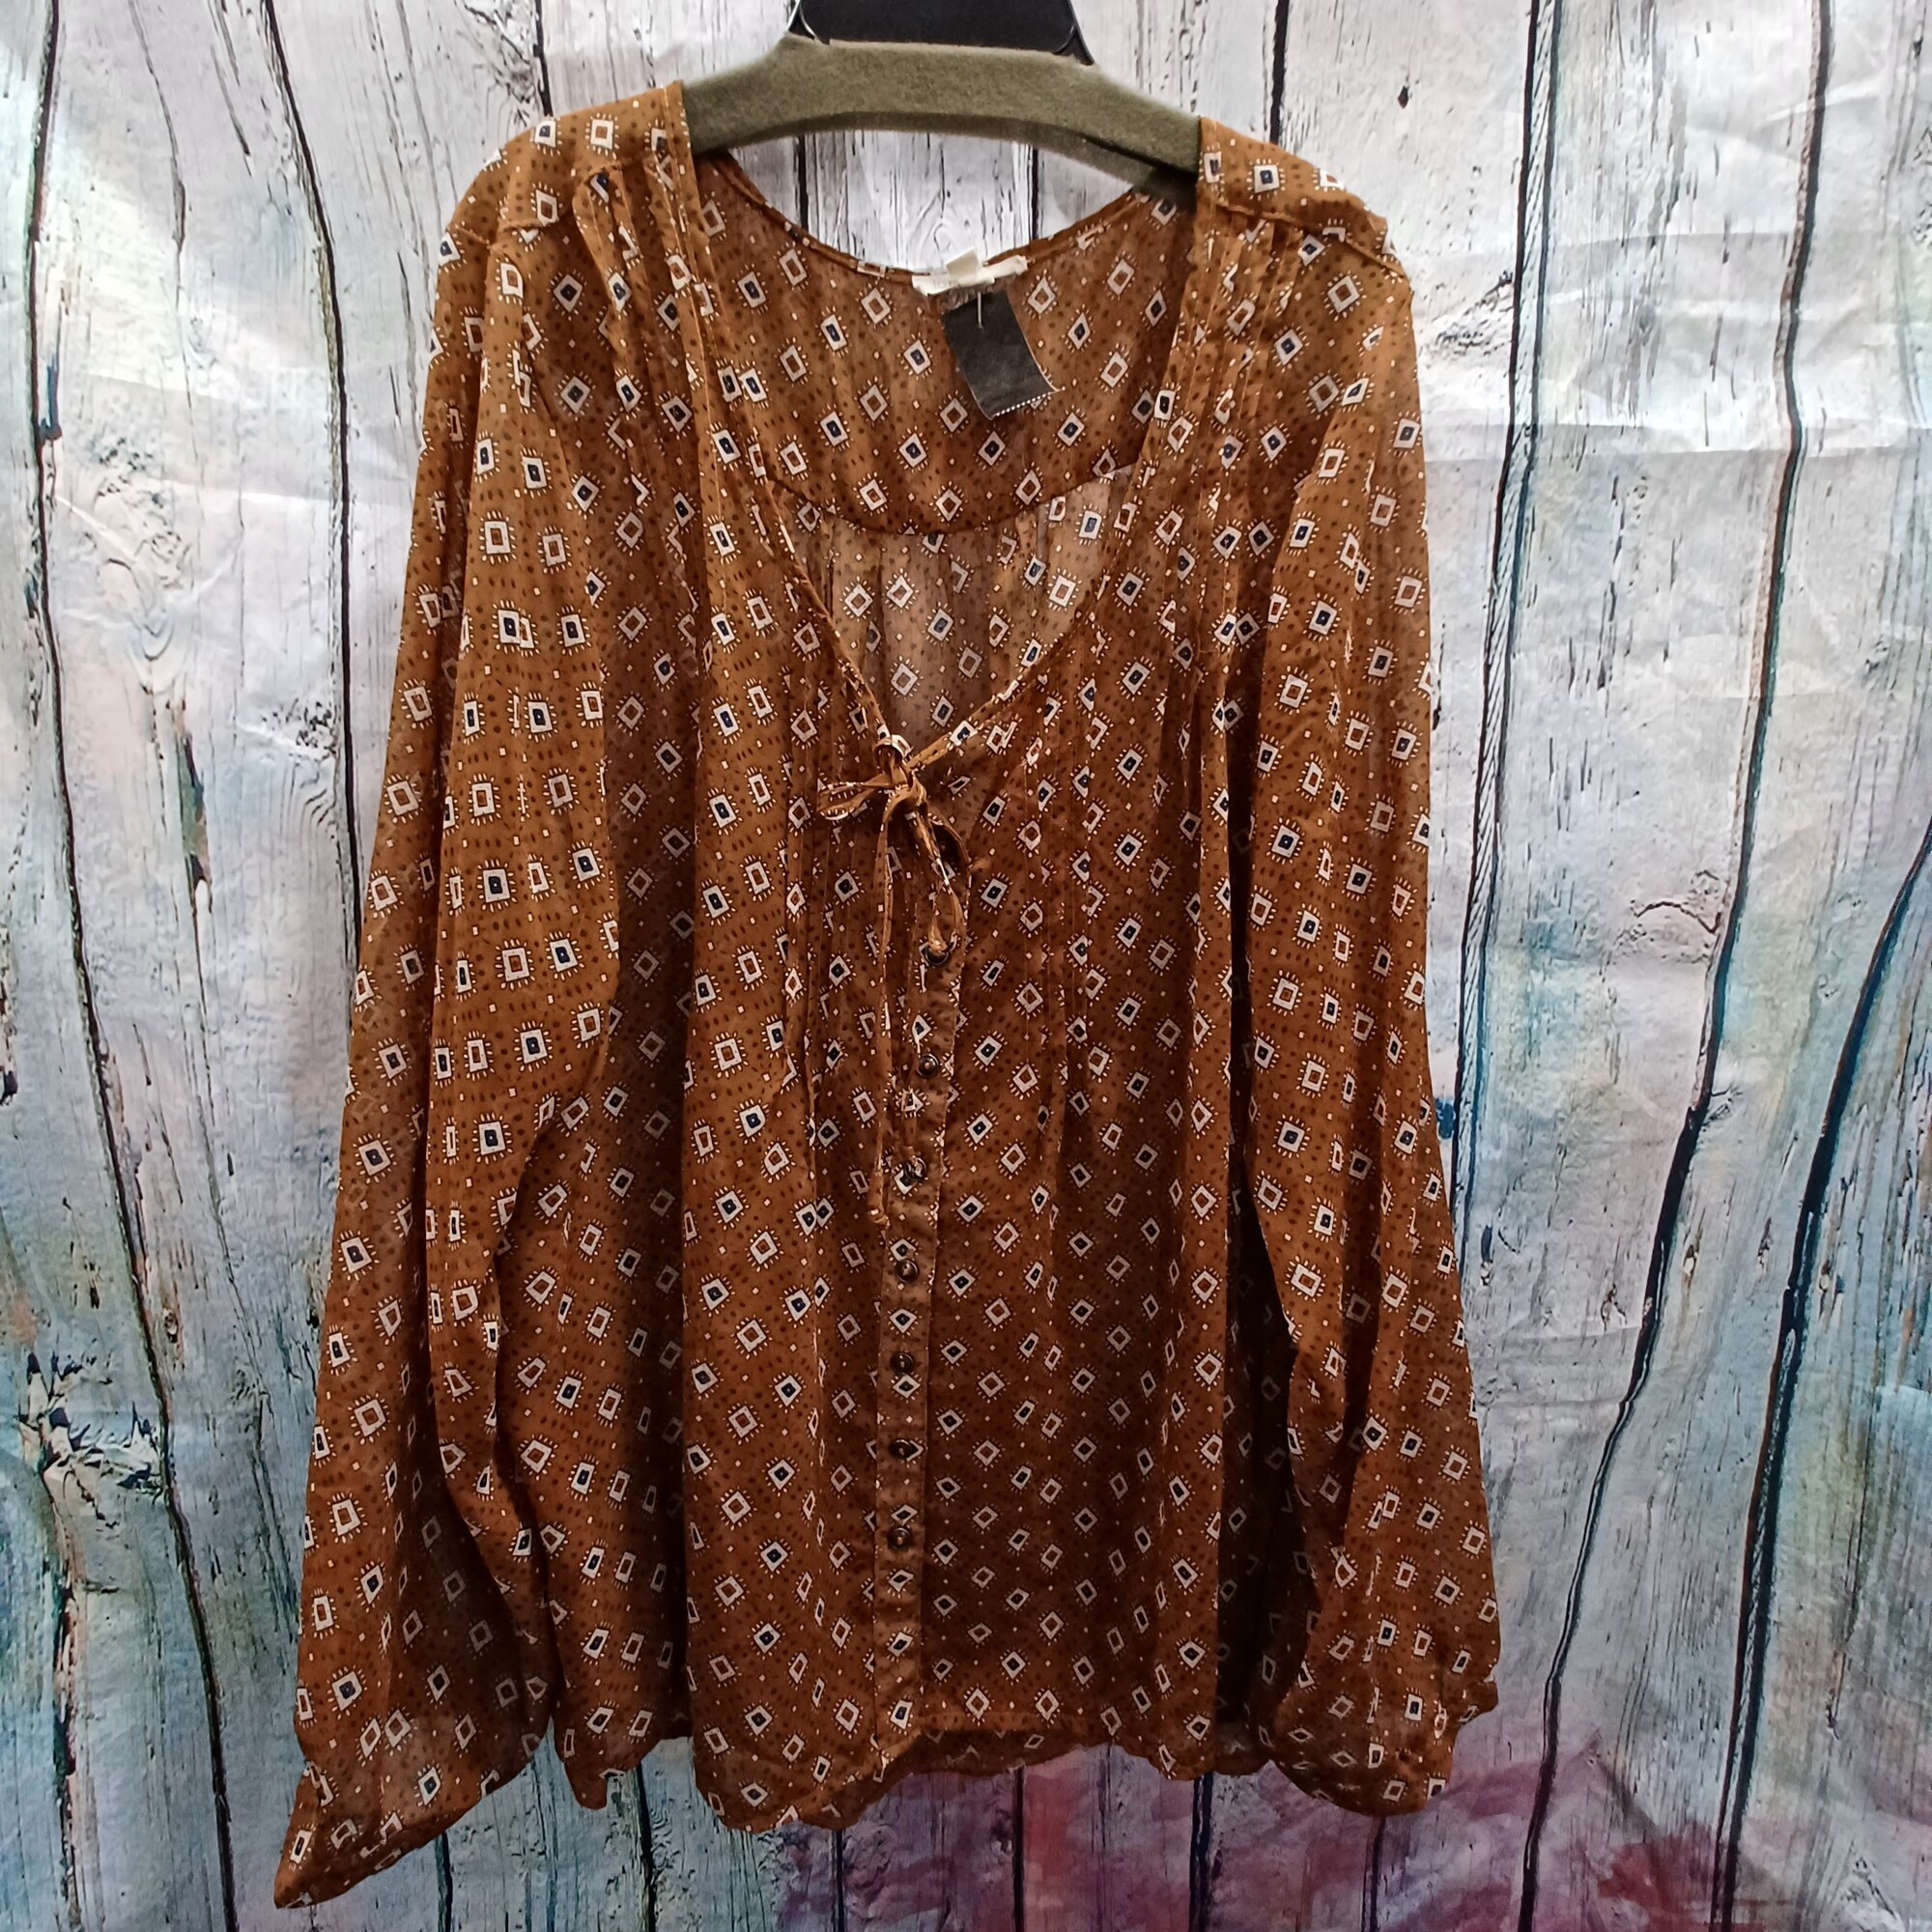 Semi sheer button up blouse with long sleeves in brown with funky white, red and blue pattern